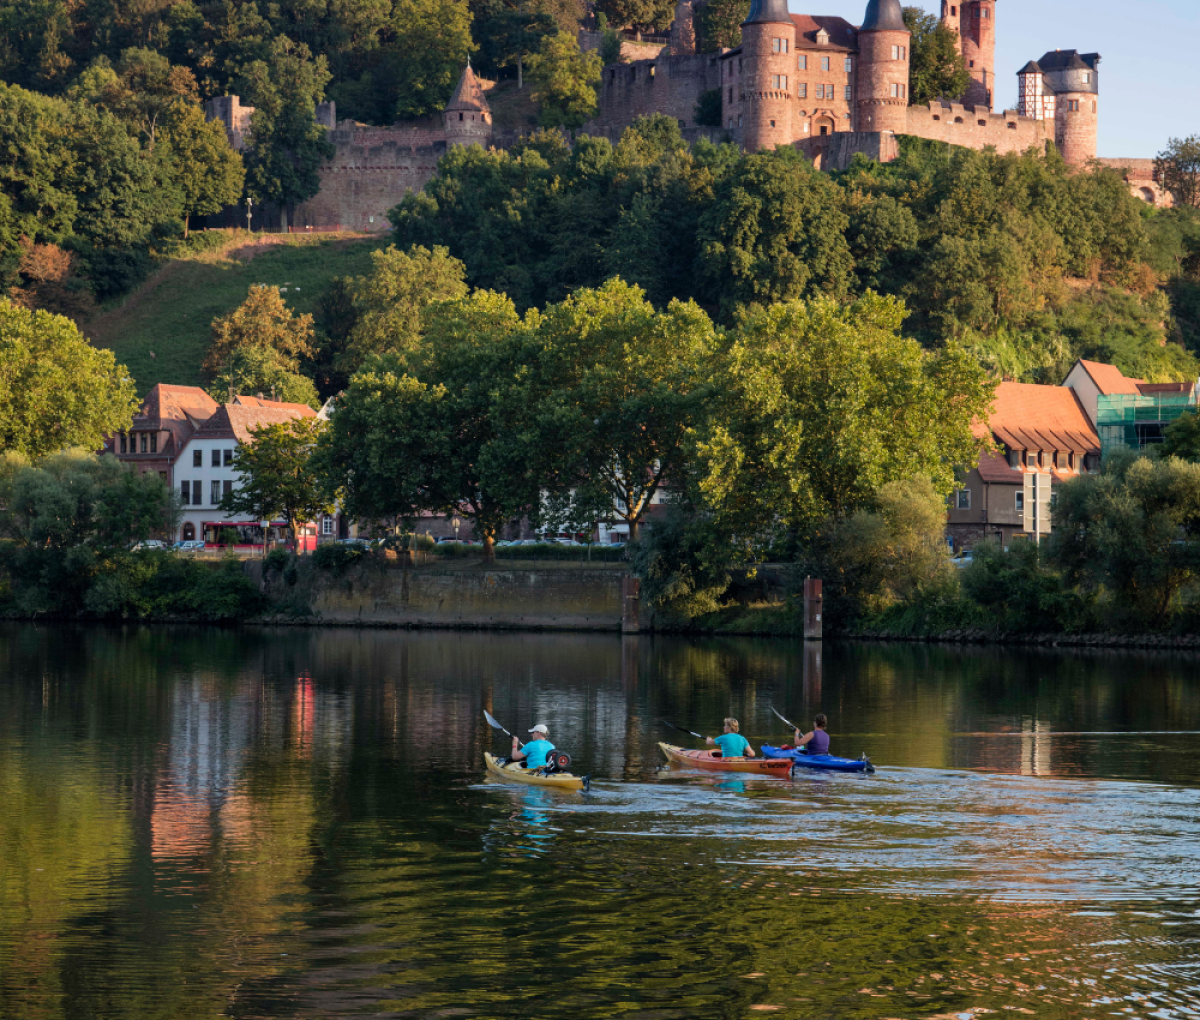 Canoes on a lake in Wertheim, Germany